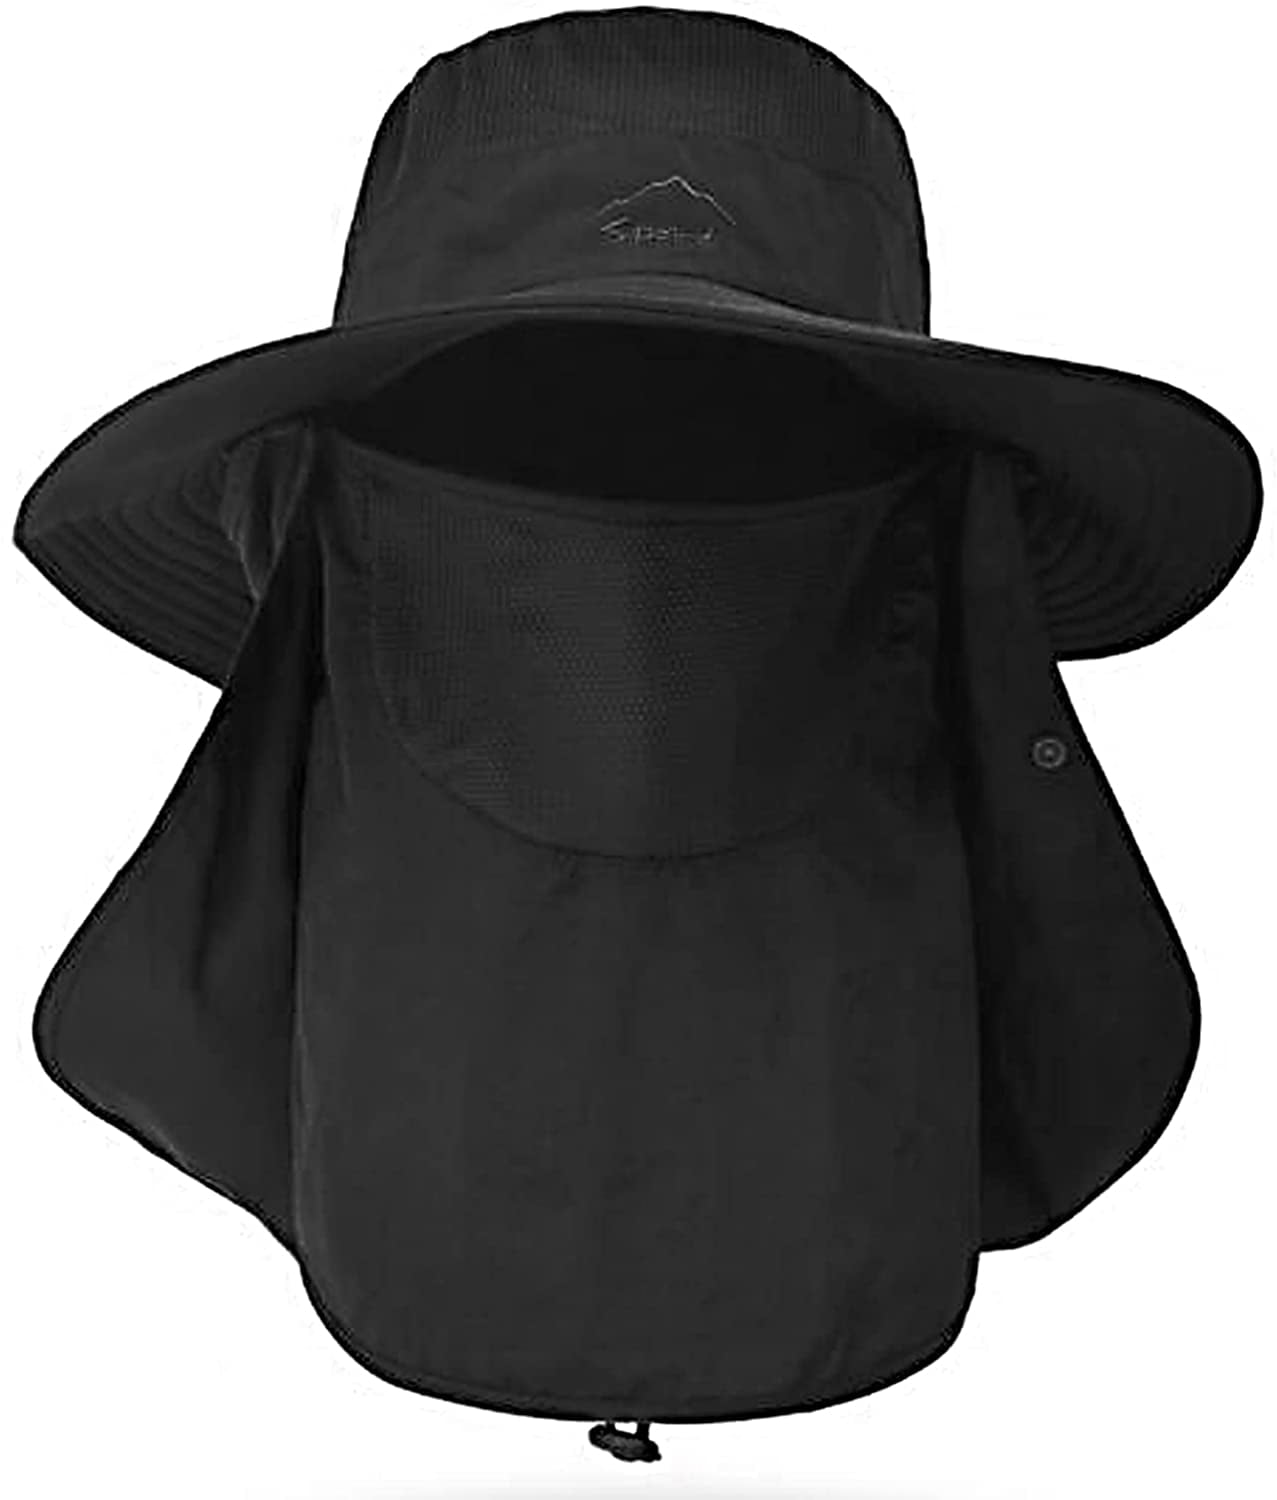 Fishing Hat for Men & Women, Sun Hat with Neck Flap, UV Protection SPF  Waterproof Boonie Hat for Fishing Hiking Garden Safari Beach 